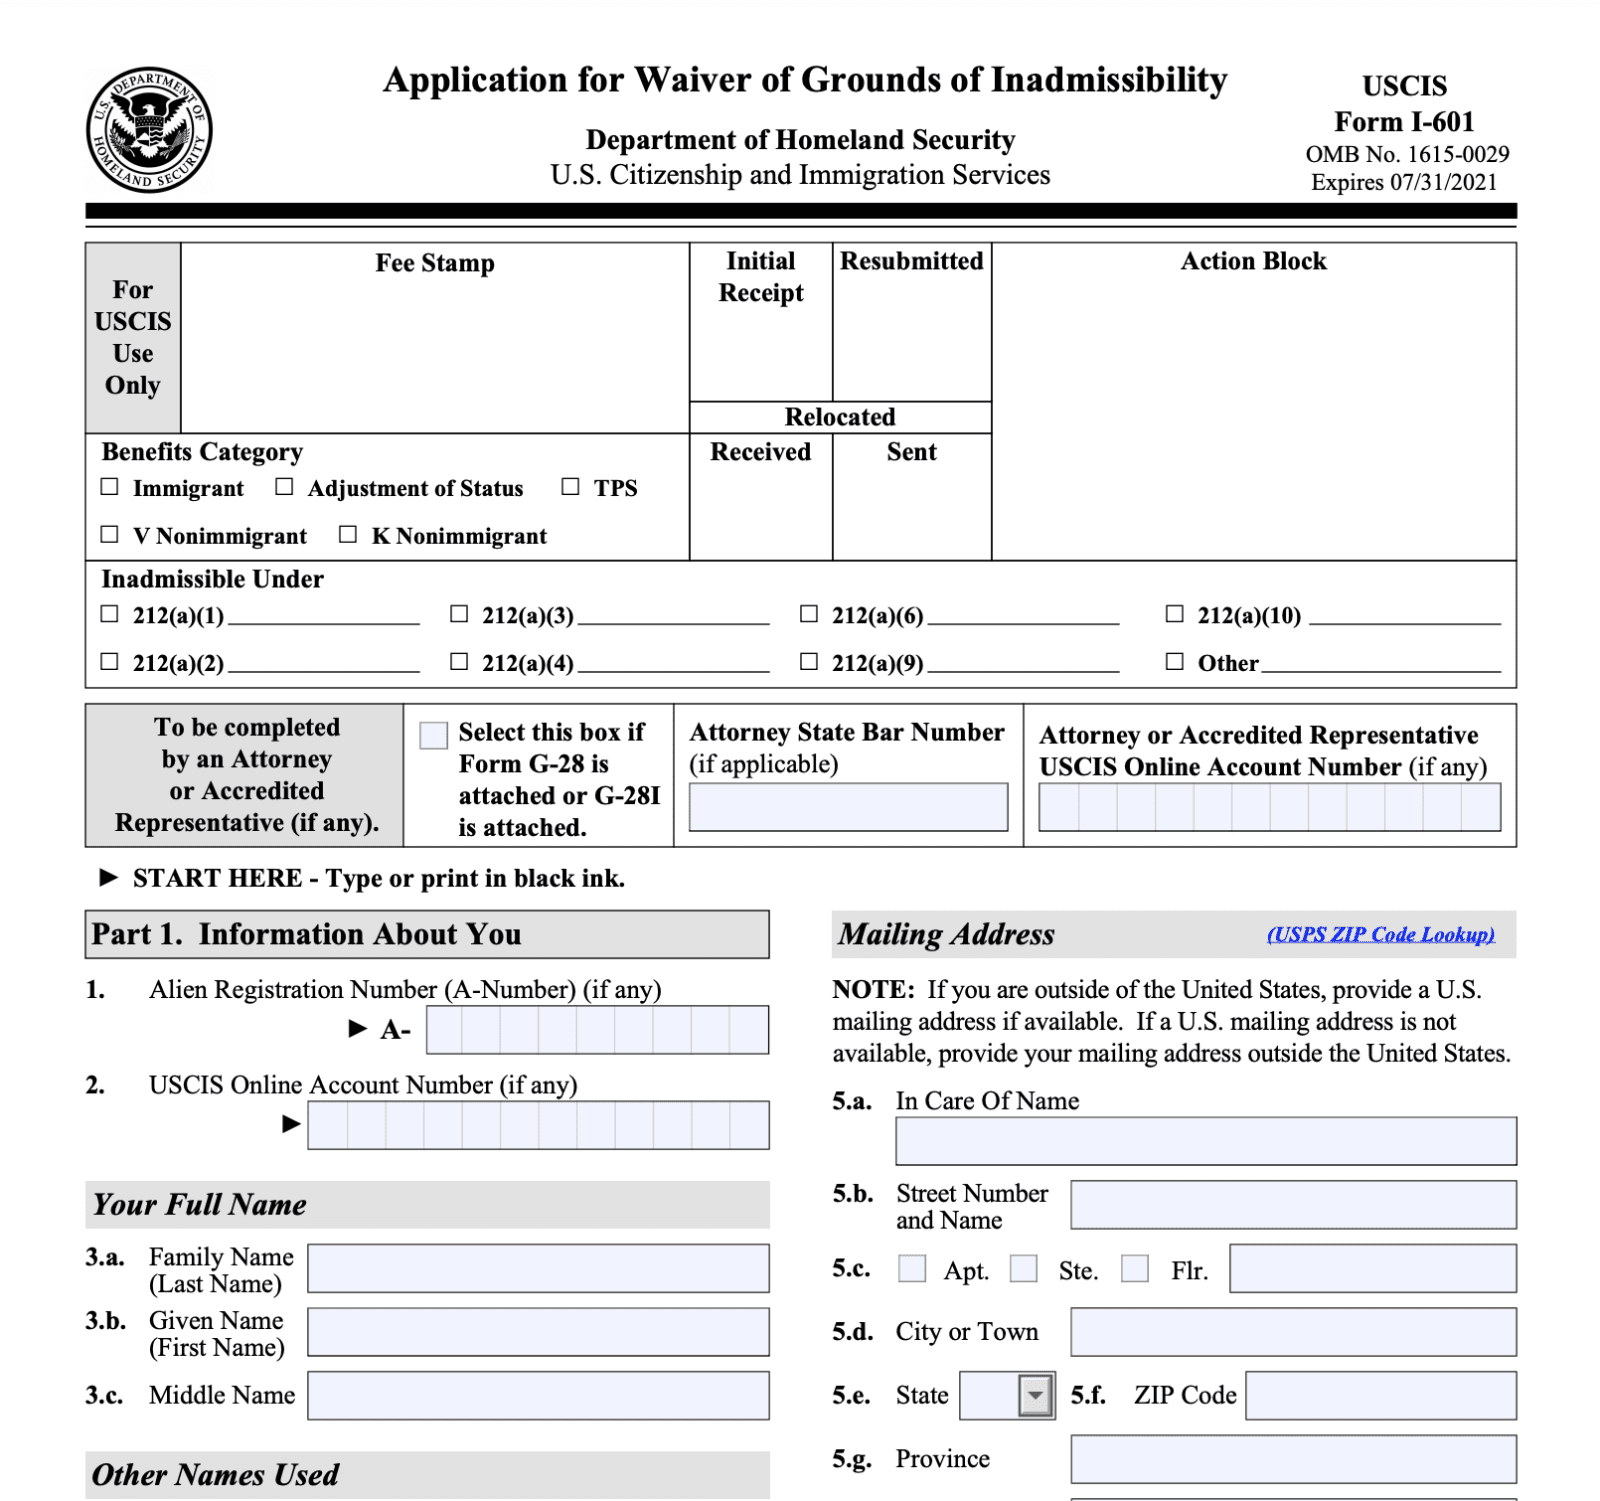 How to Apply for a Waiver of Inadmissibility with Form I601